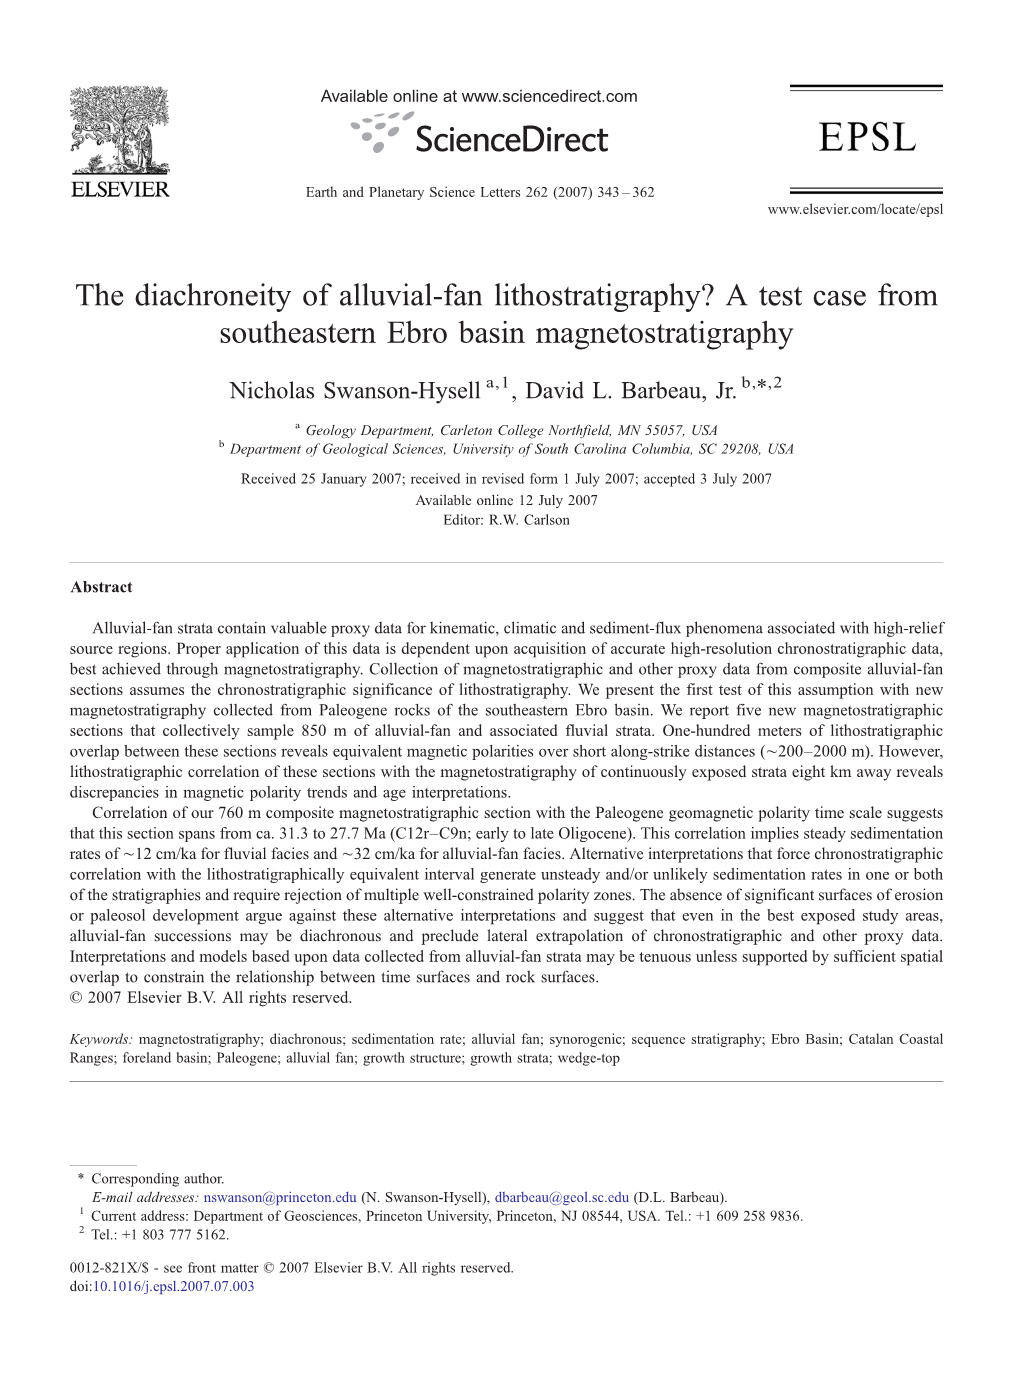 The Diachroneity of Alluvial-Fan Lithostratigraphy? a Test Case from Southeastern Ebro Basin Magnetostratigraphy ⁎ Nicholas Swanson-Hysell A,1, David L